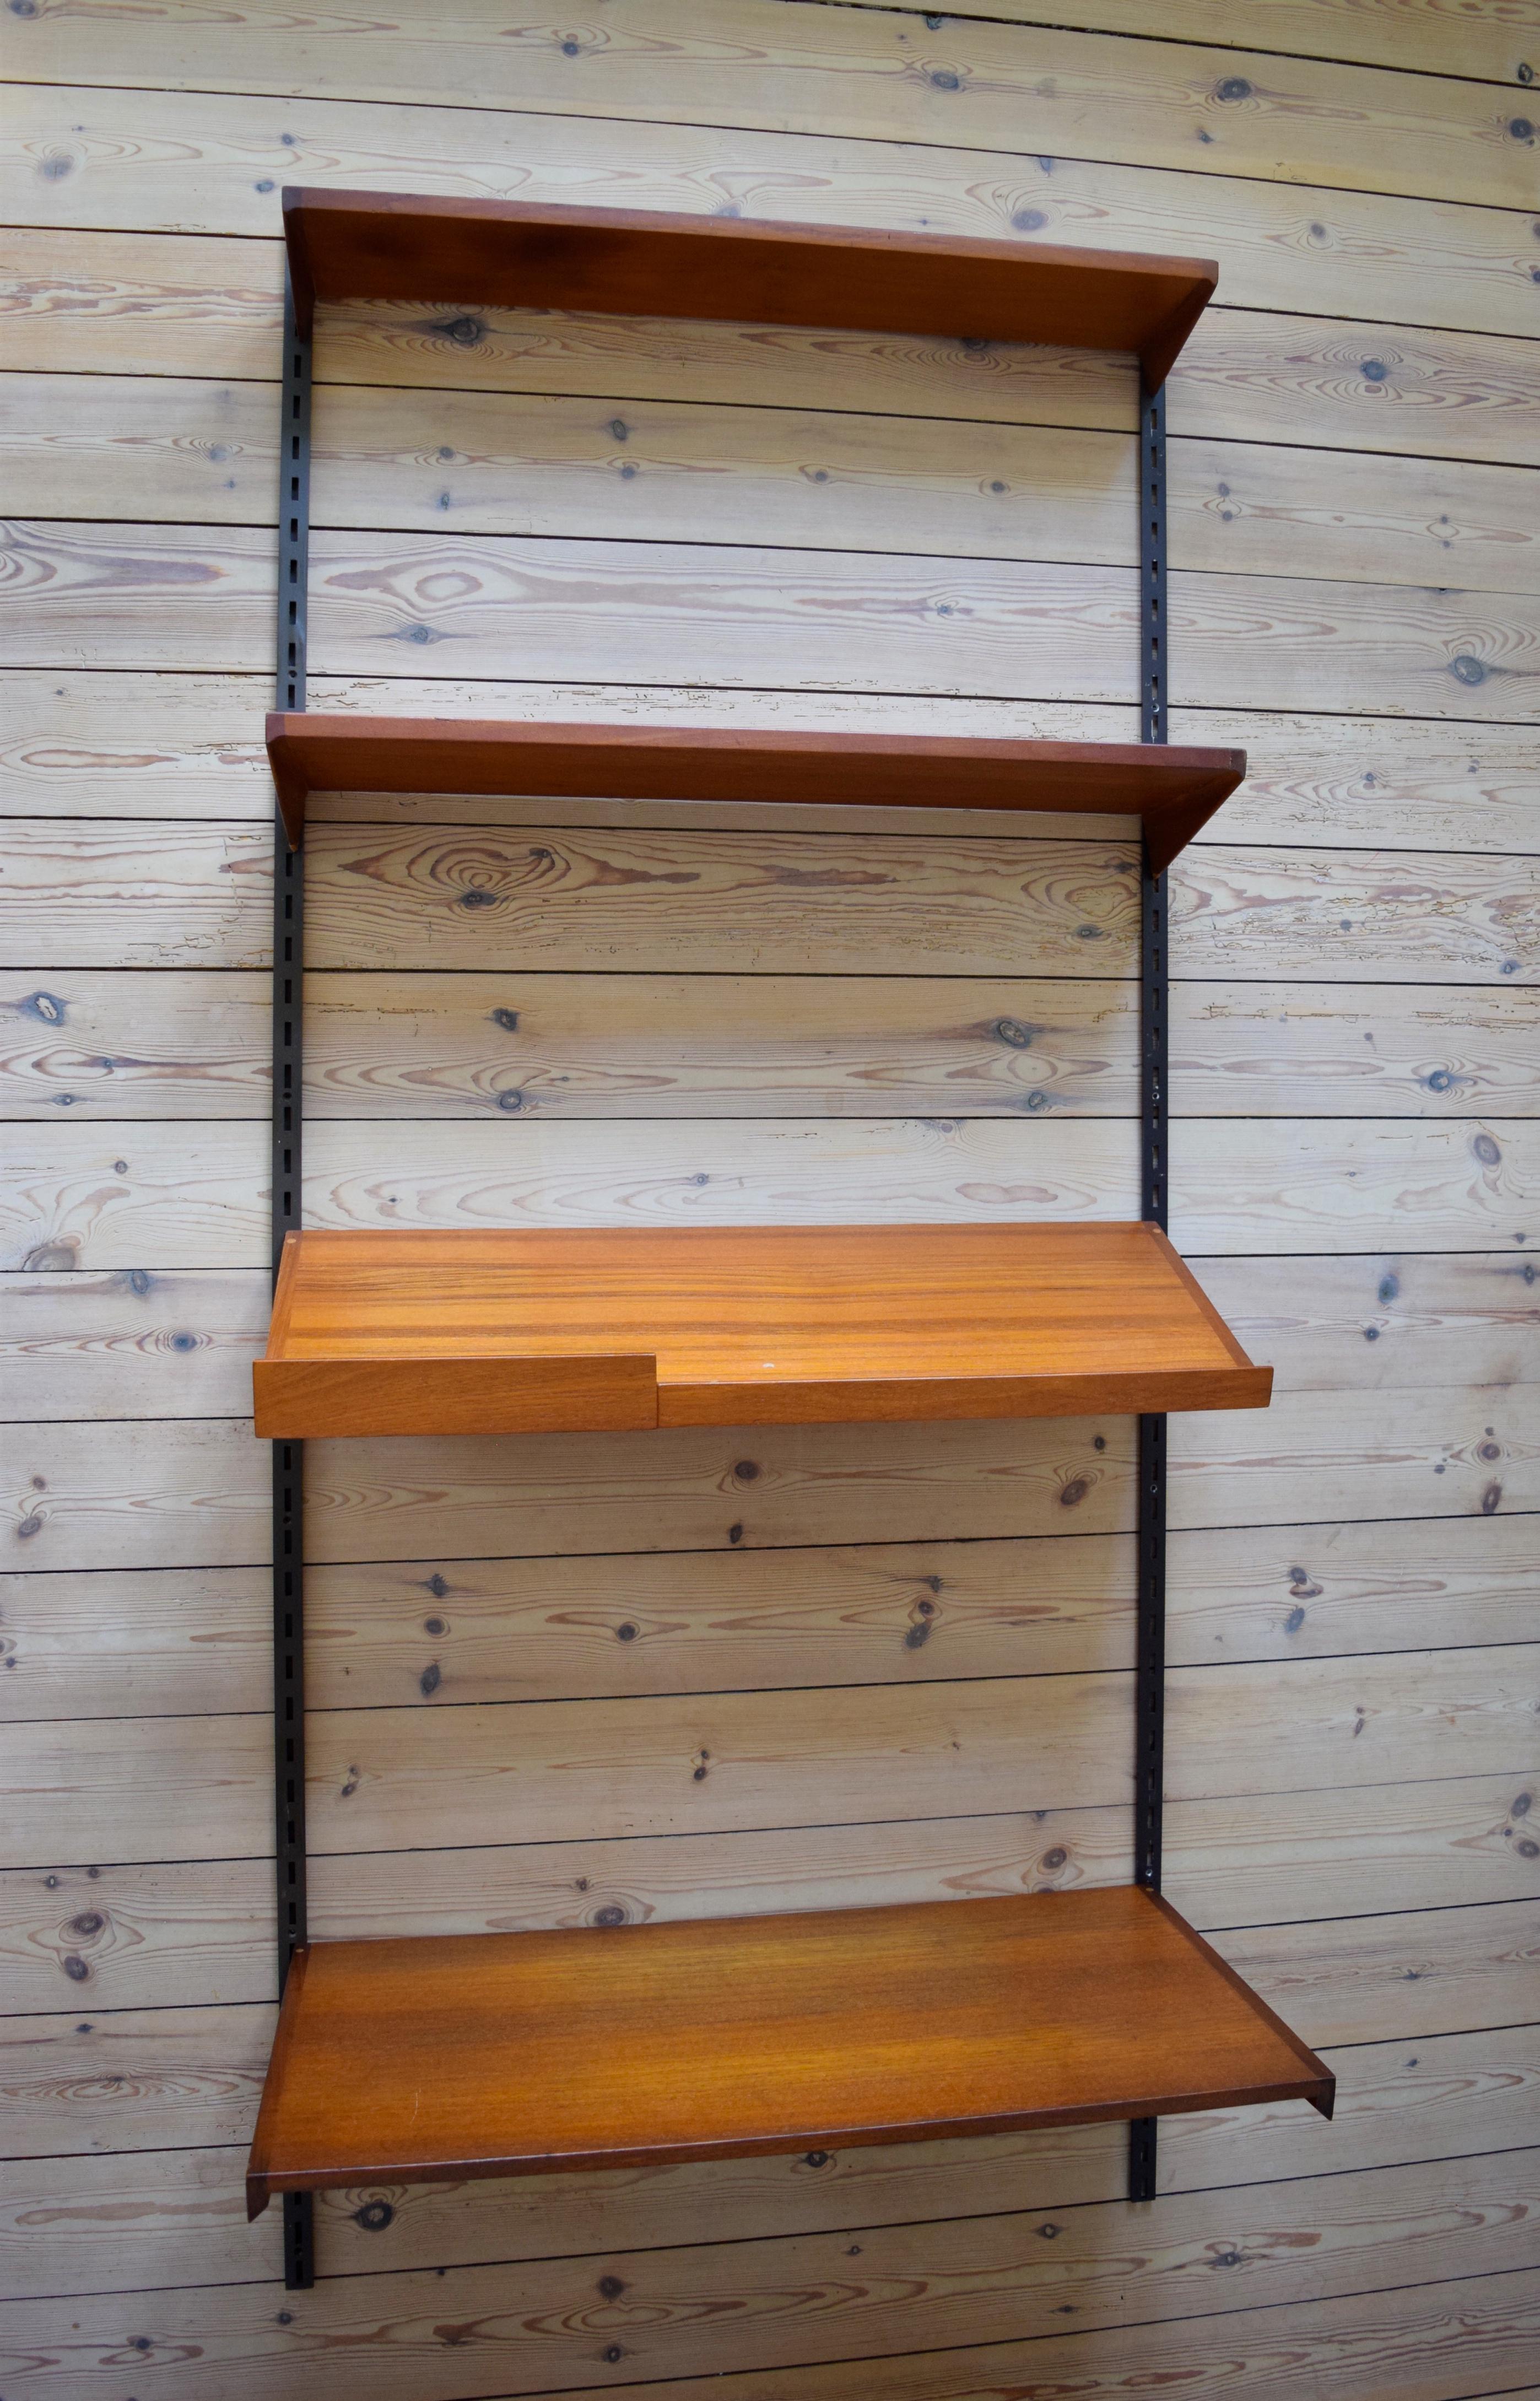 Set of four teak shelves by Kai Kristiansen and manufactured by FM Møbler, Denmark from the 1960s. This system comprises of two 24cm height adjustable shelves, magazine shelf, desk shelf and two hanging rails. Labelled by manufacturer.